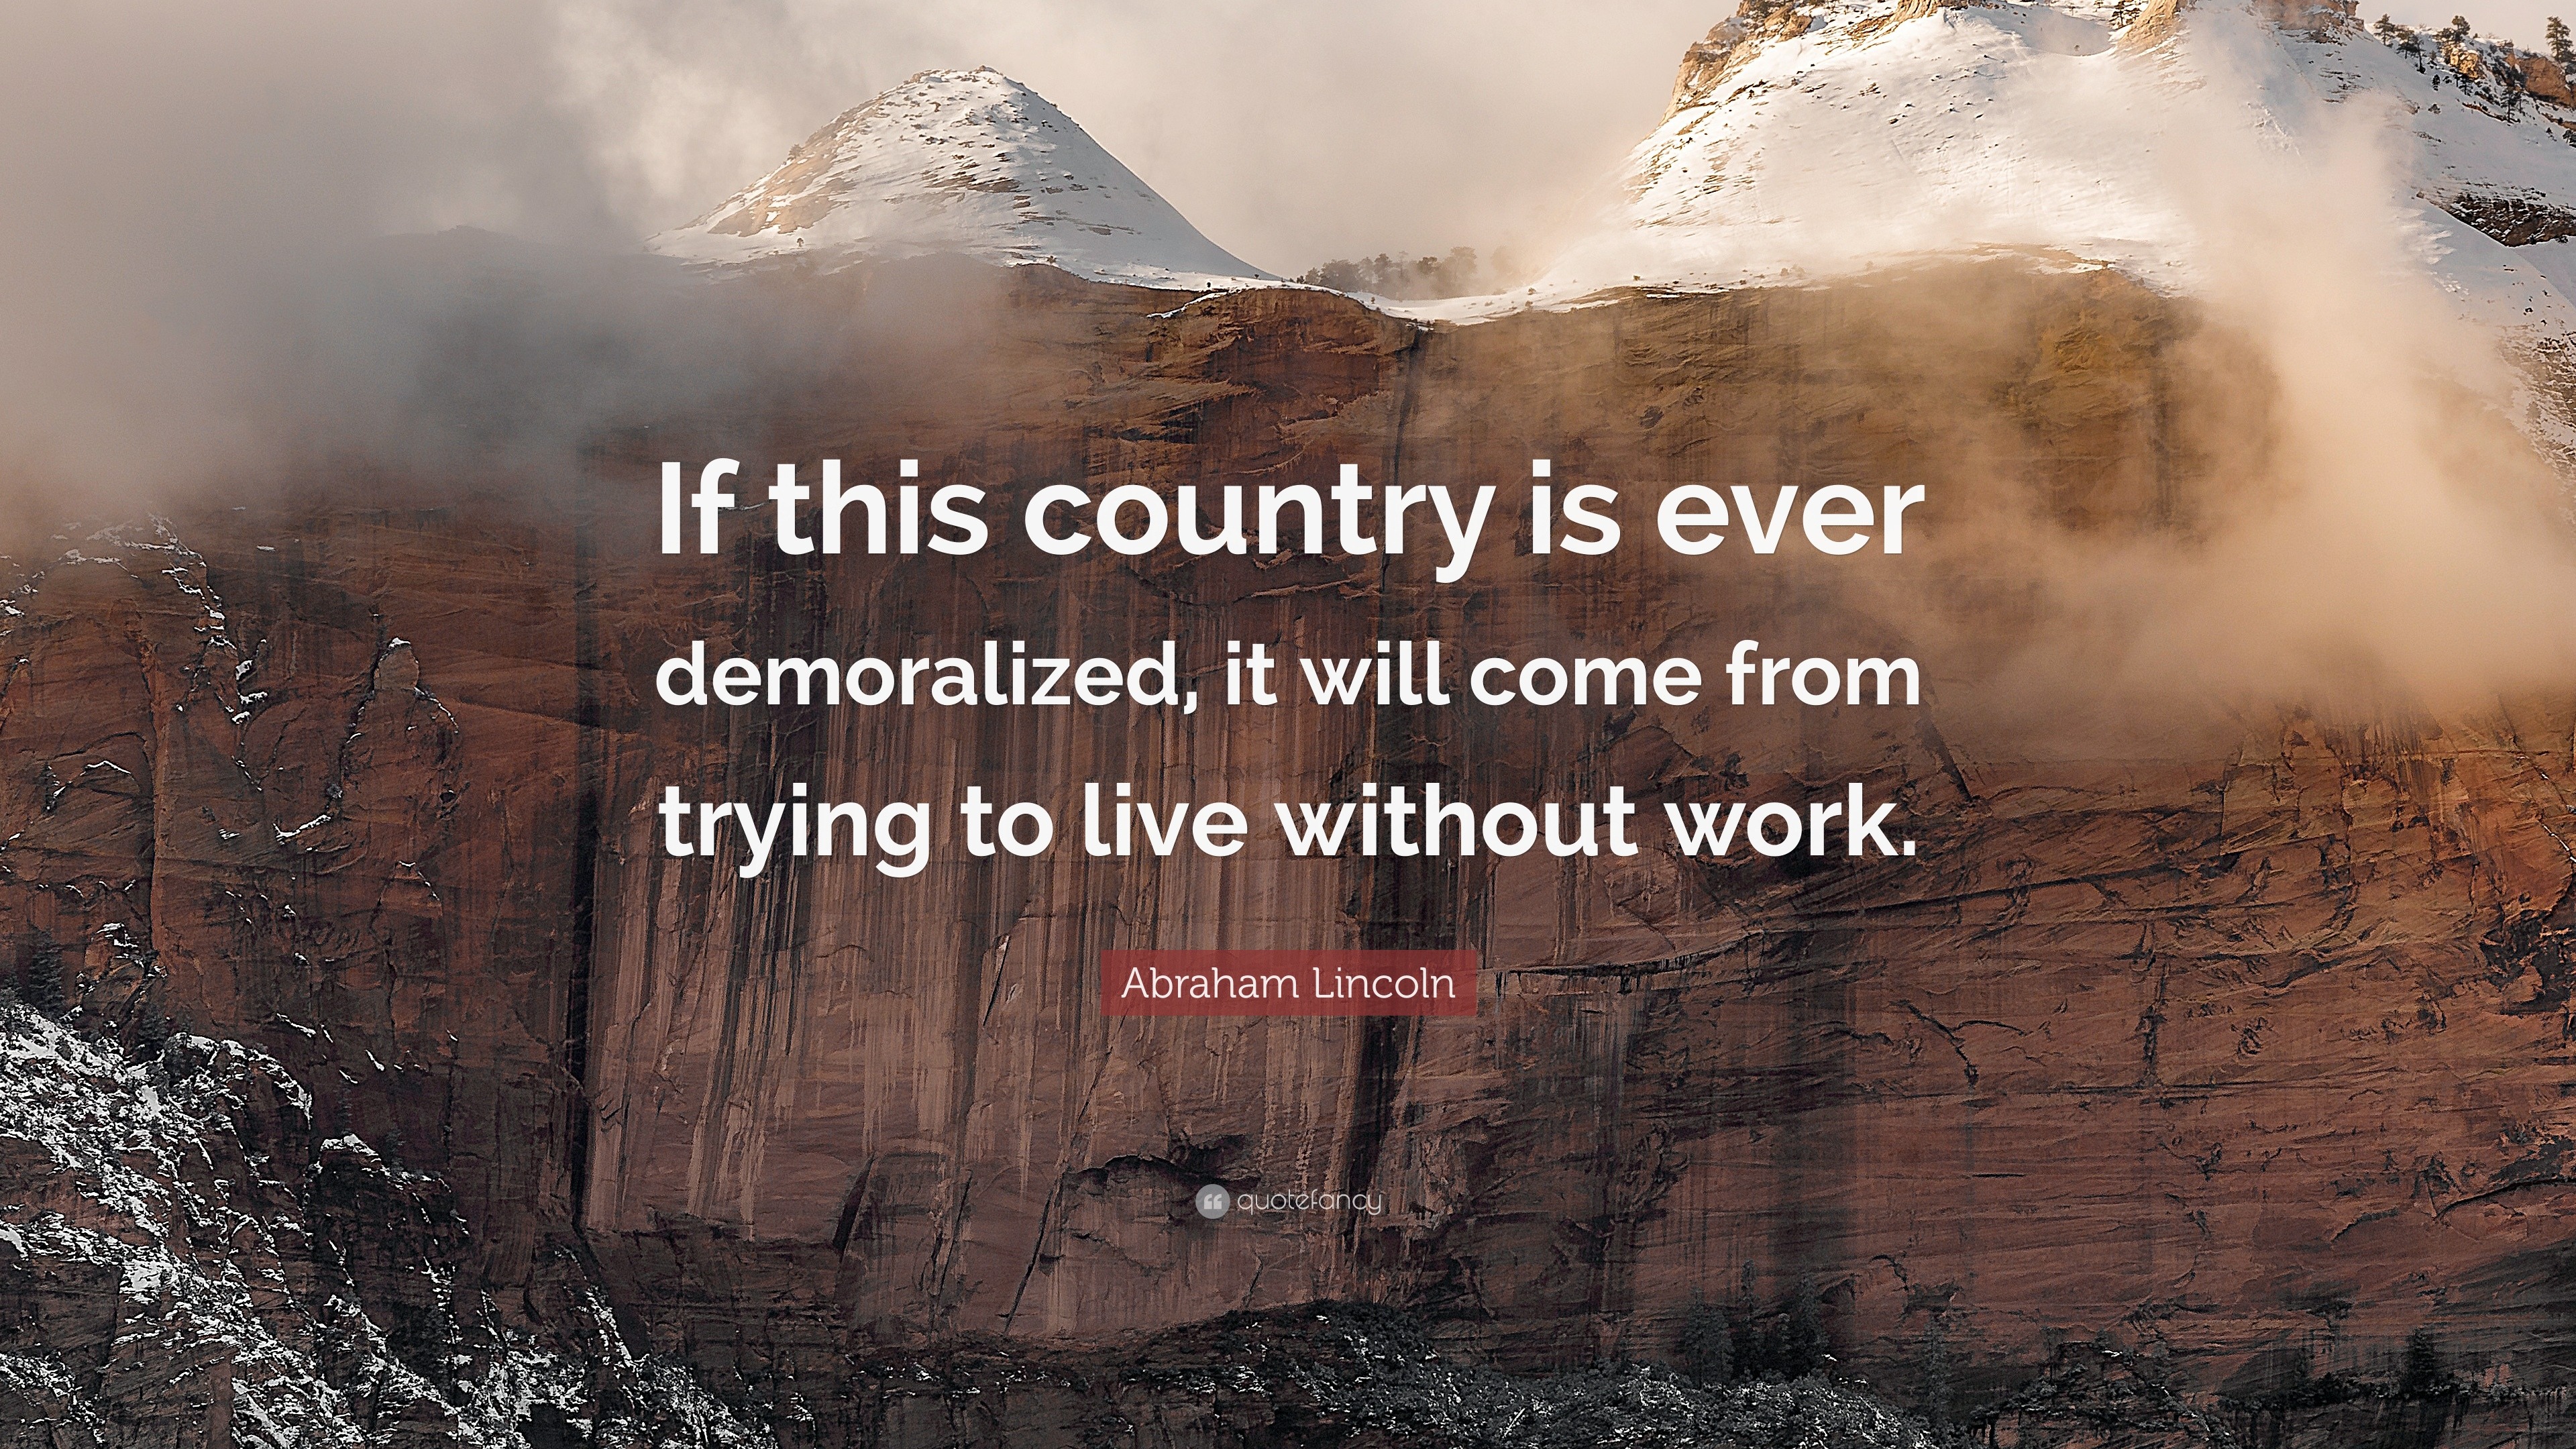 Abraham Lincoln Quote: “If this country is ever demoralized, it will ...